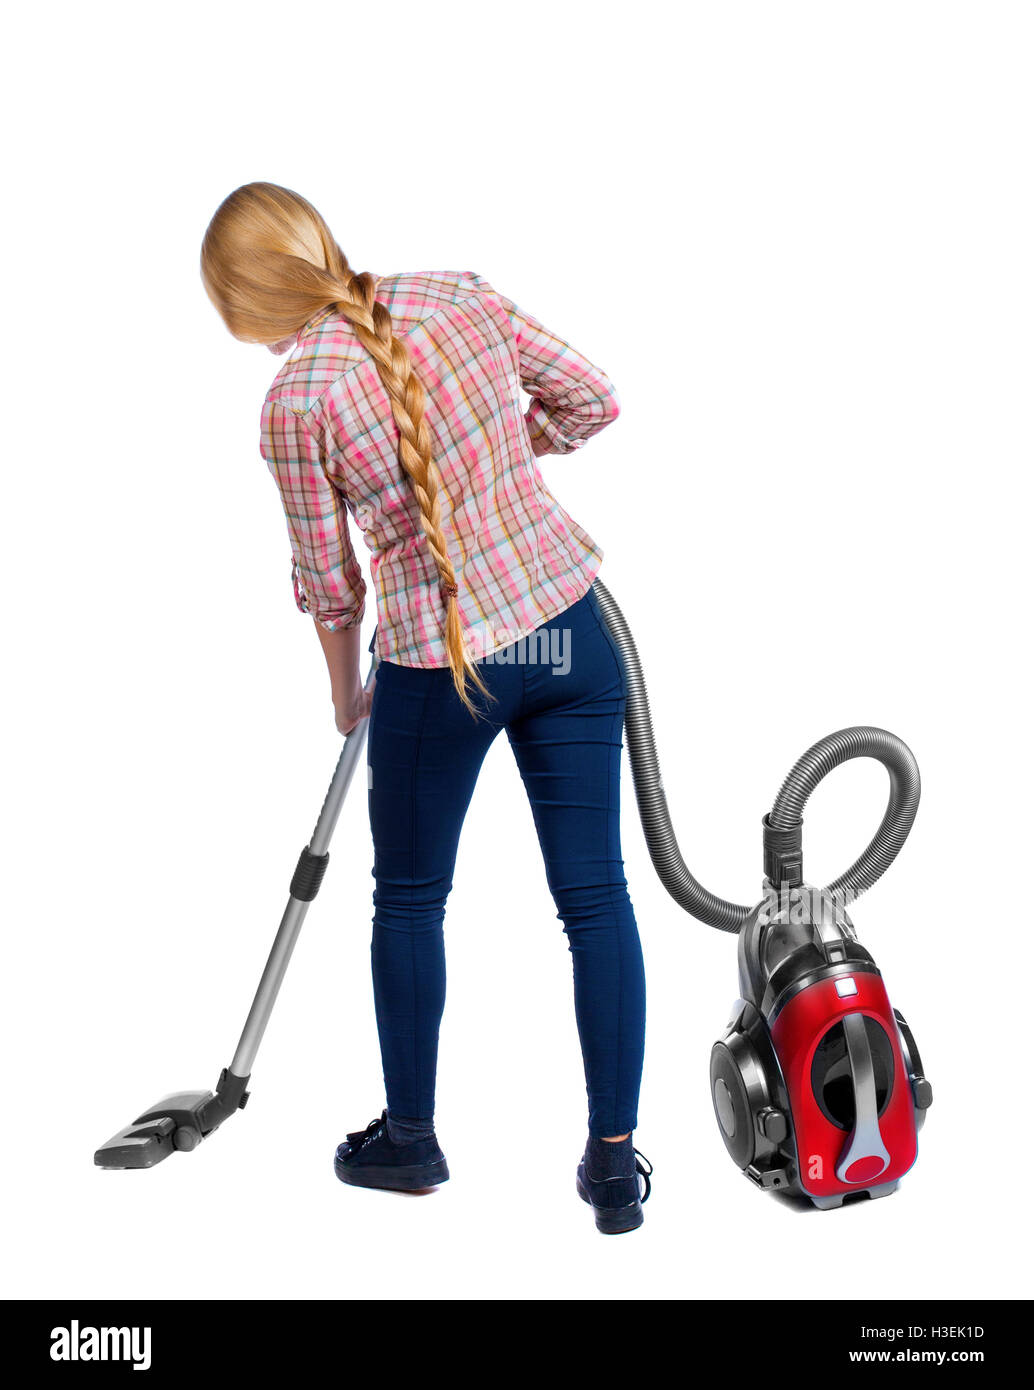 Rear view of a woman with a vacuum cleaner. She is busy cleaning. Rear view people collection. backside view of person. Isolated over white background. Long-haired blonde with a vacuum cleaner. Stock Photo